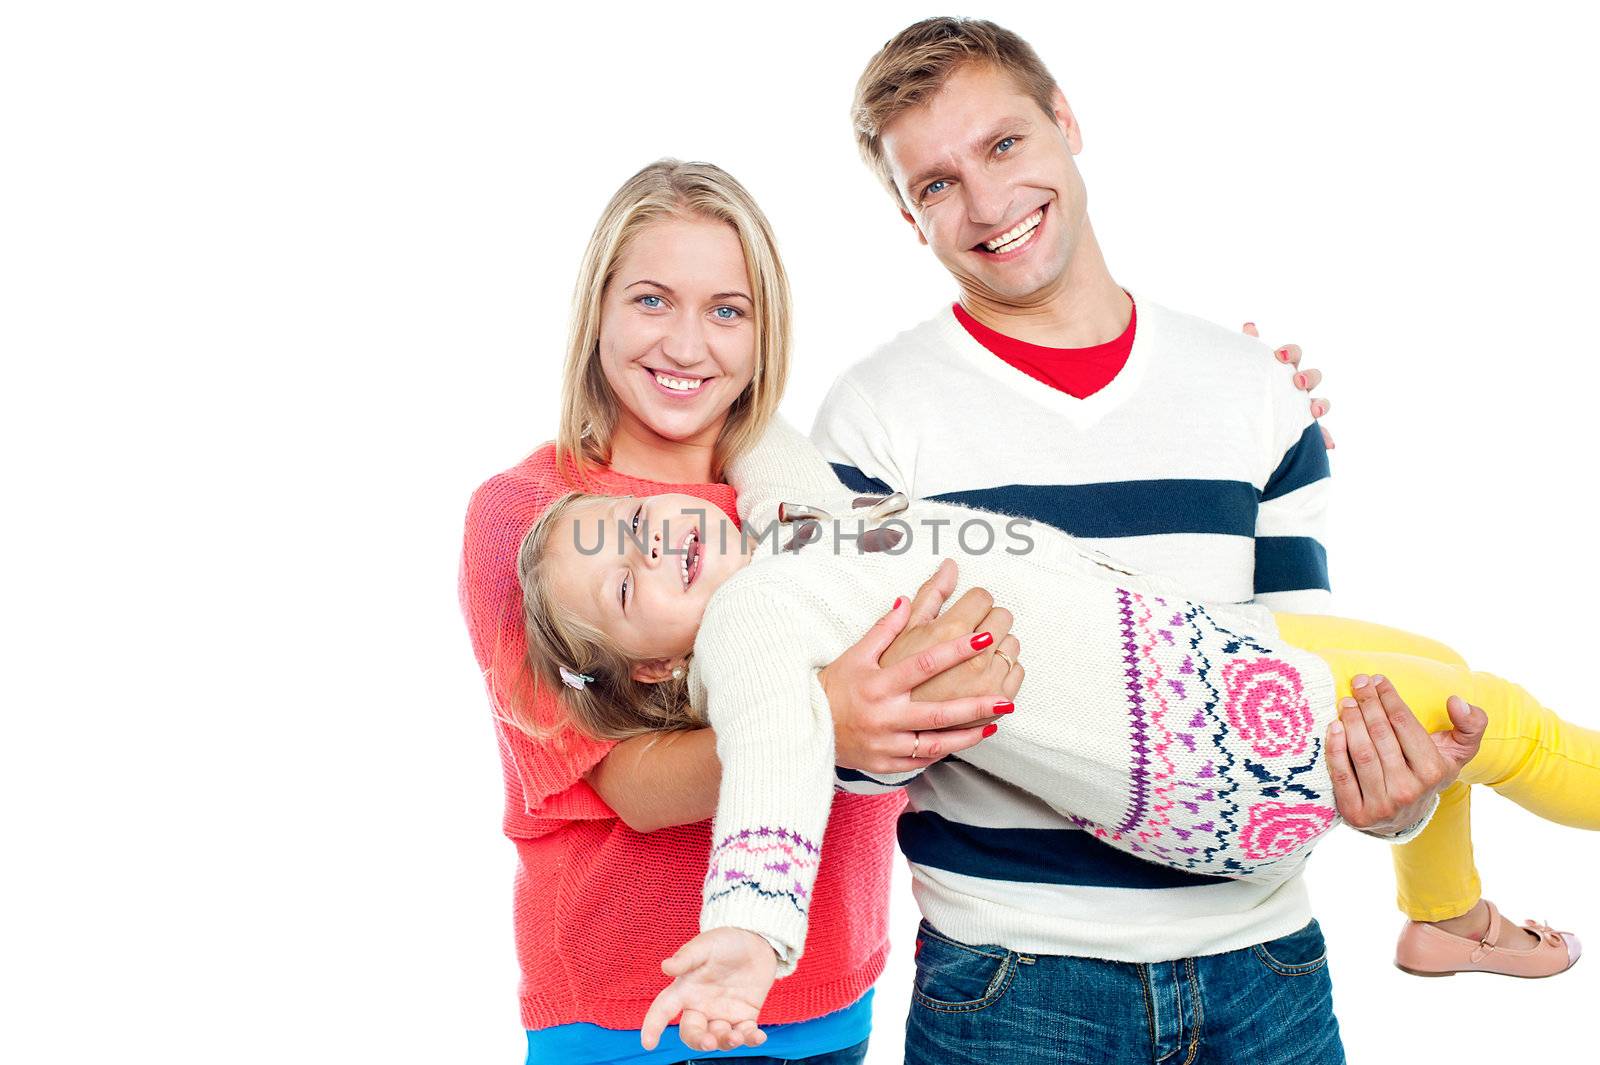 An excited daughter having fun in the safe hands of her parents. All on white background